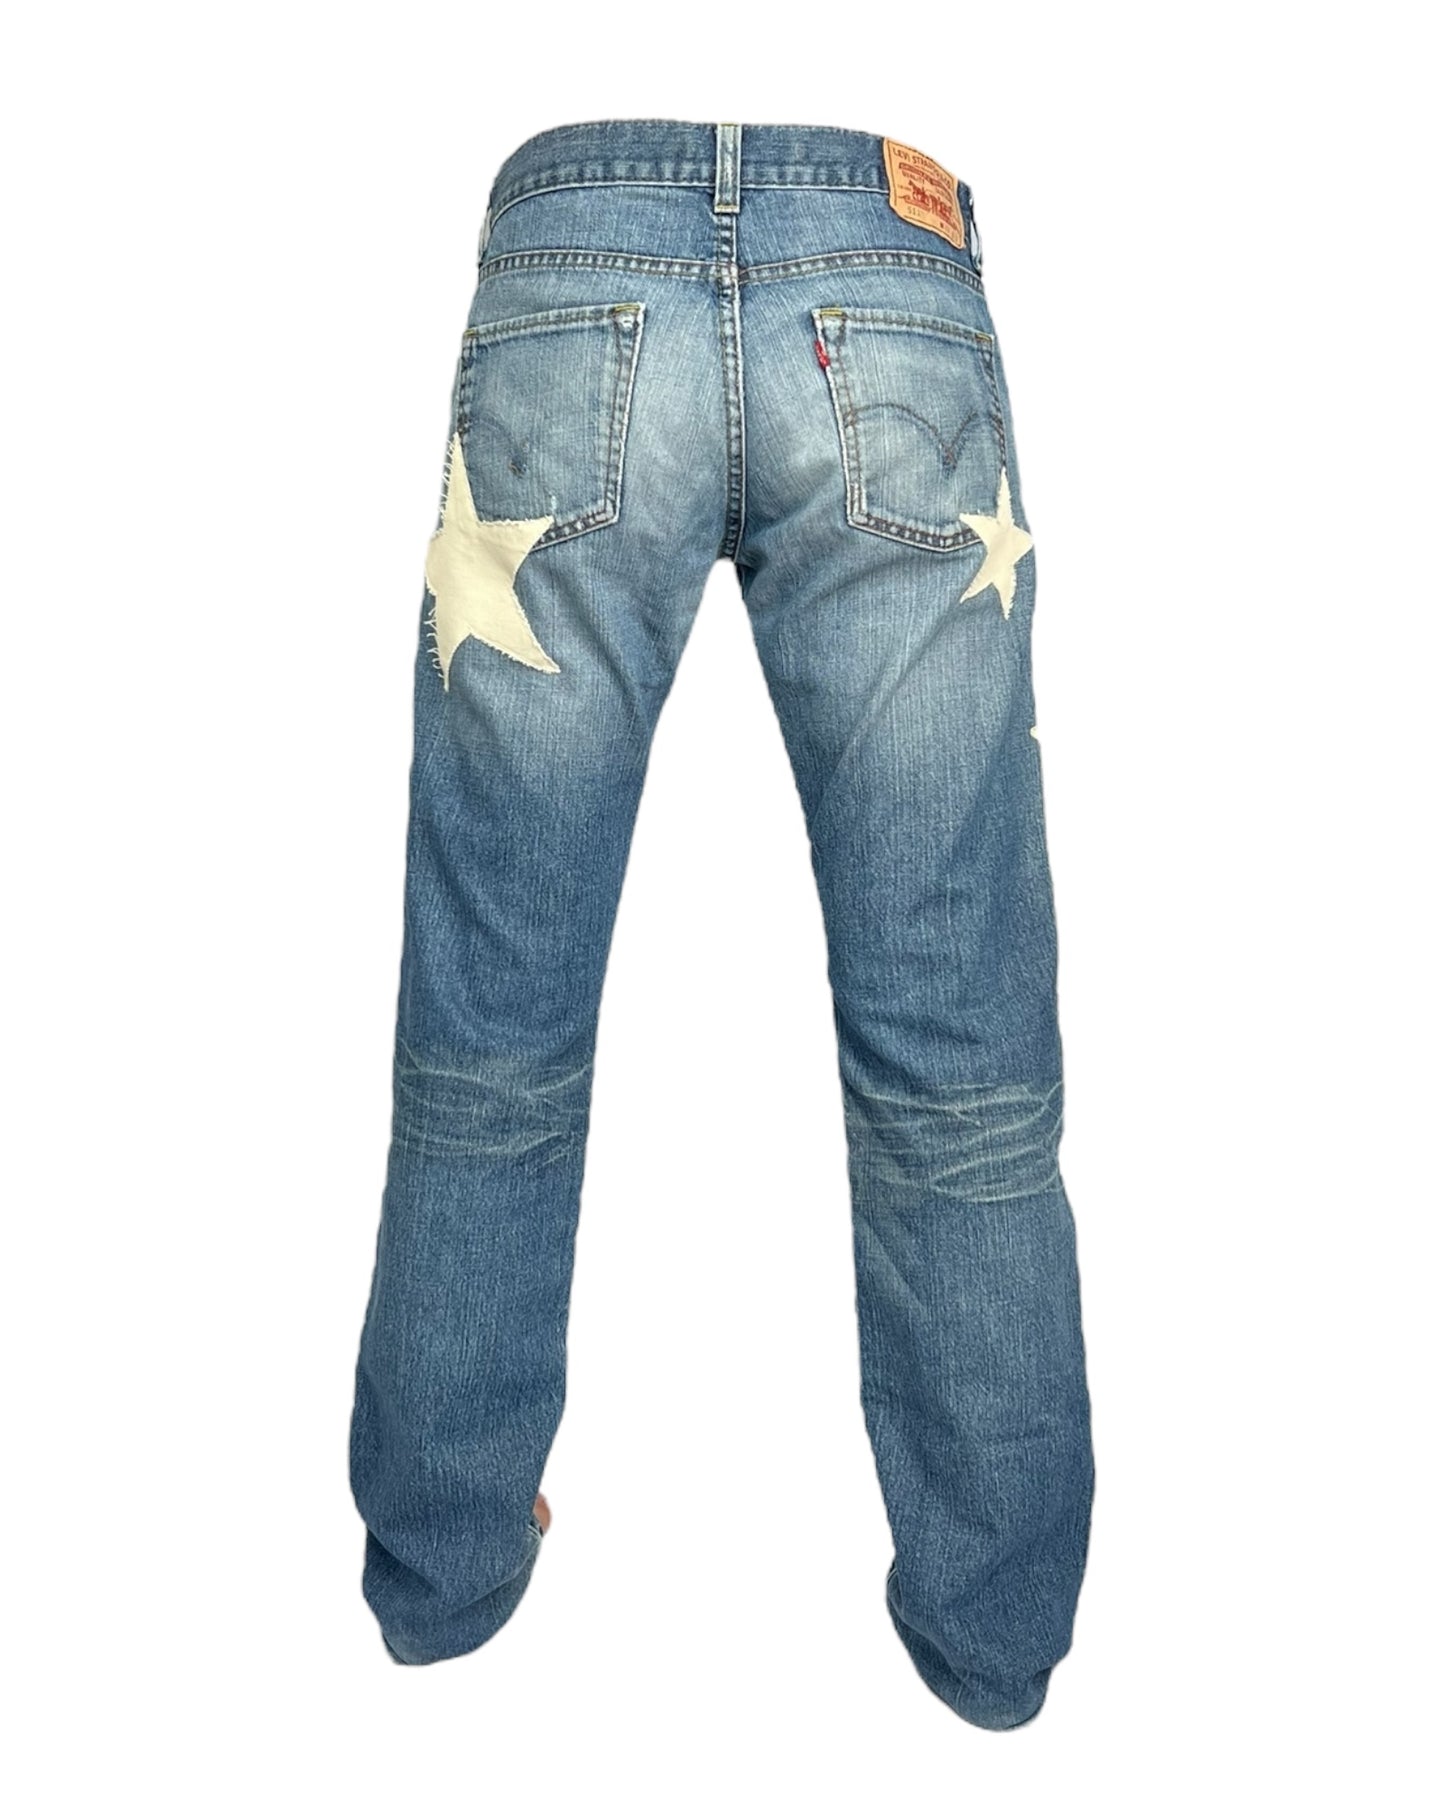 Contemporary Nude Male Jeans